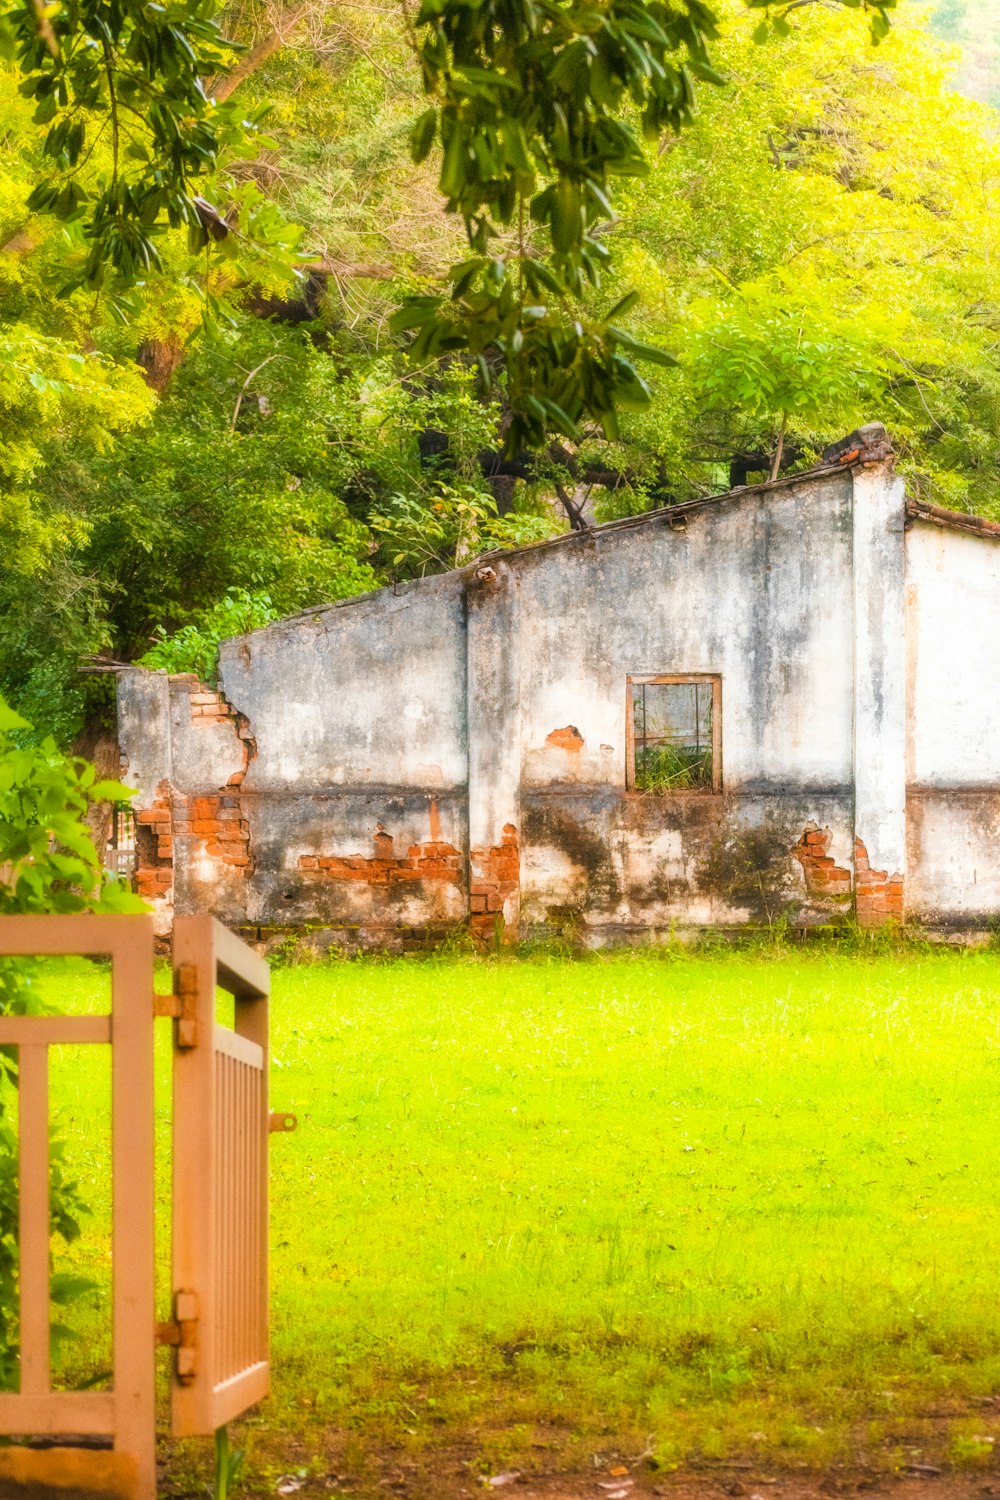 an old building sitting in the middle of a lush green field